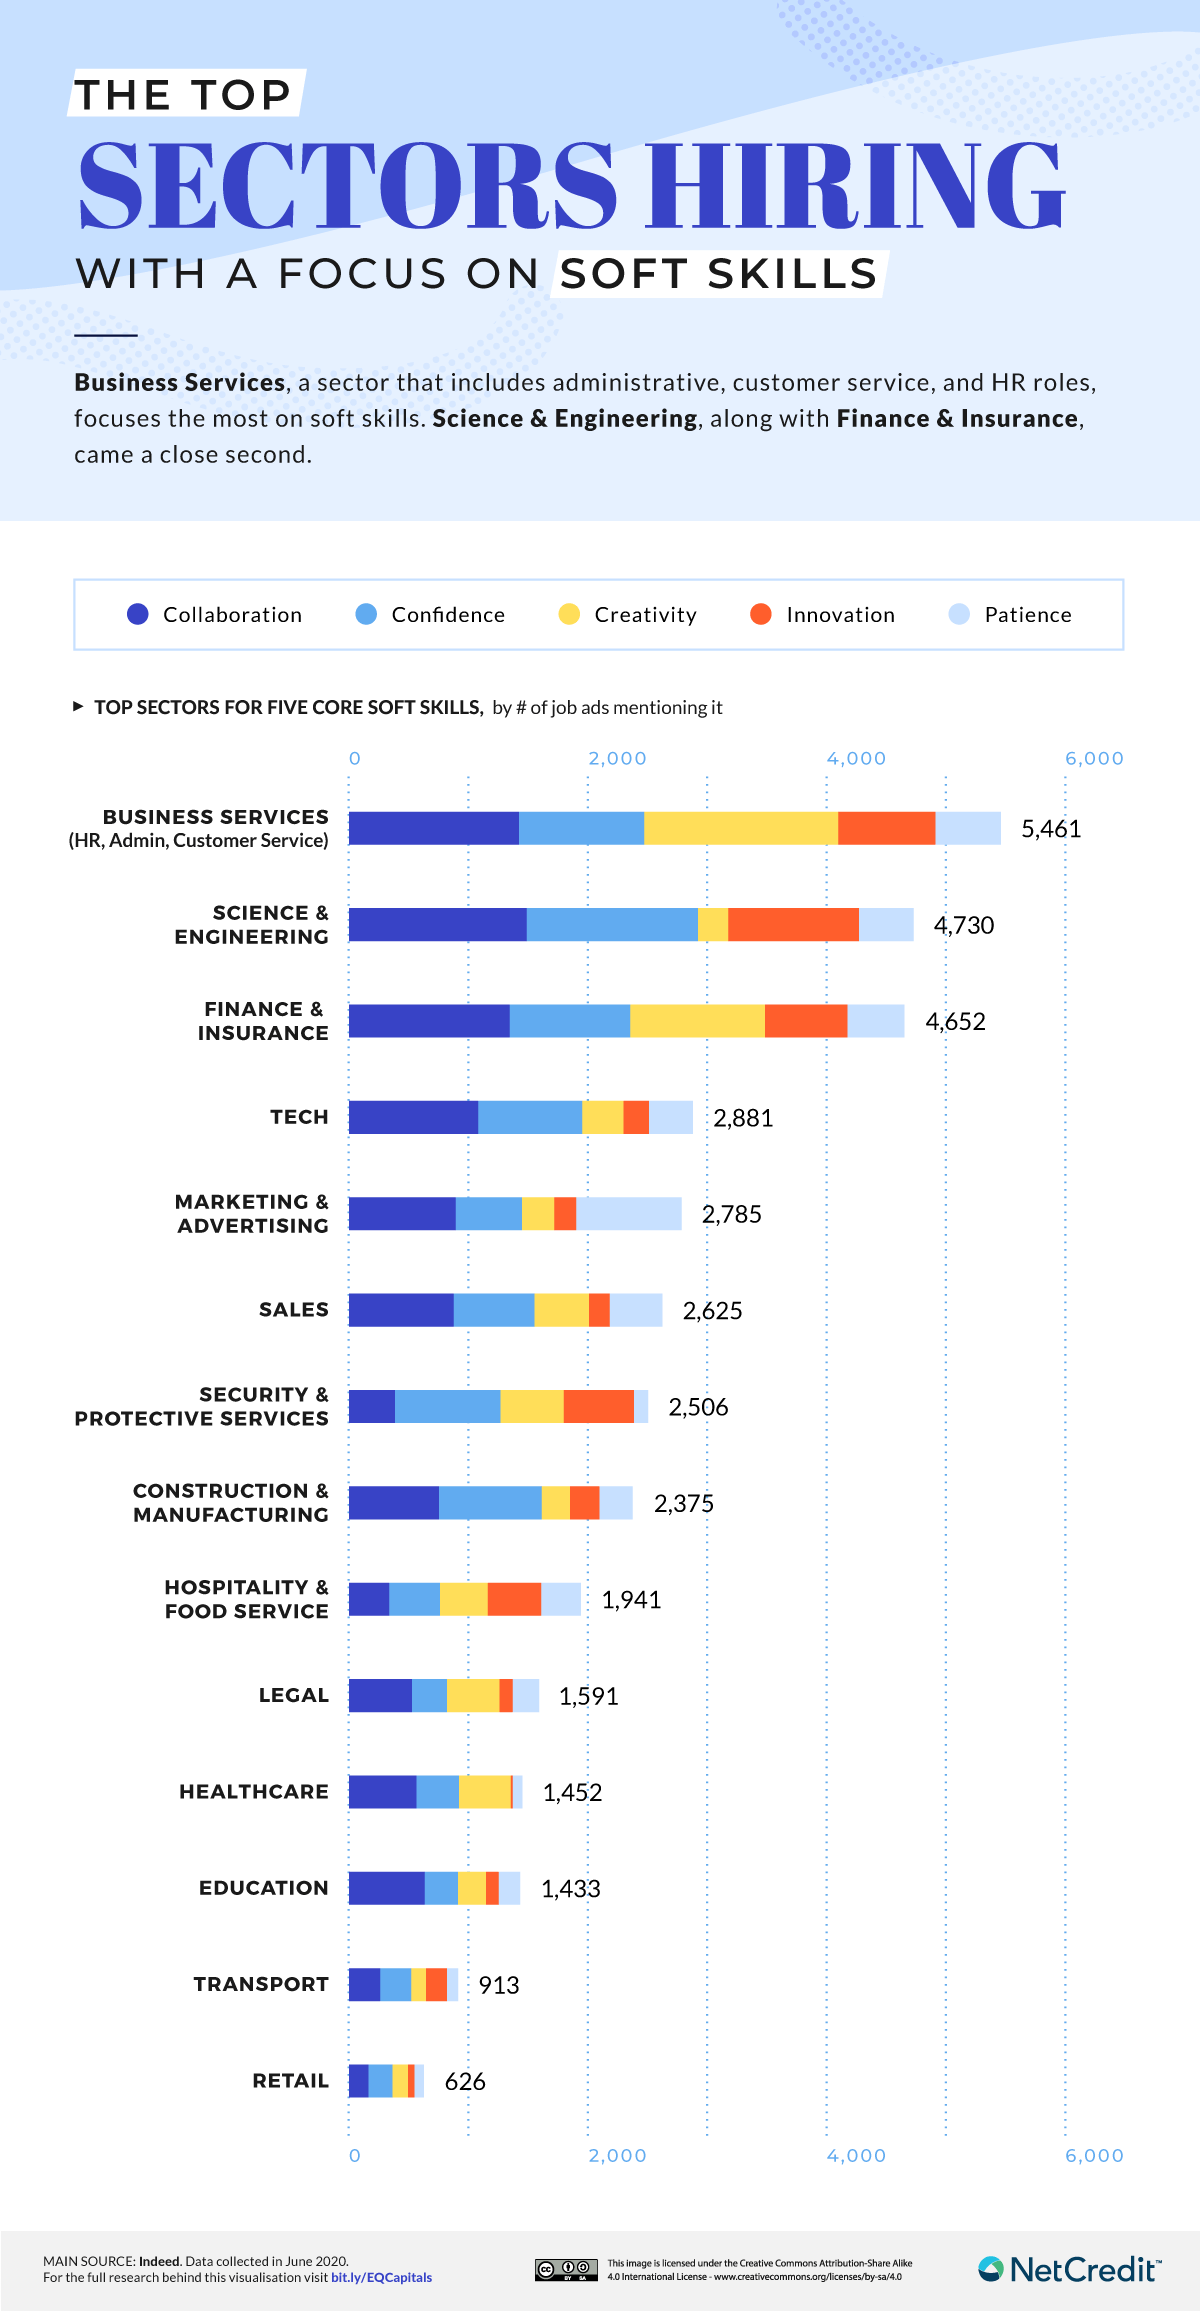 Top sectors hiring with a focus on soft skills